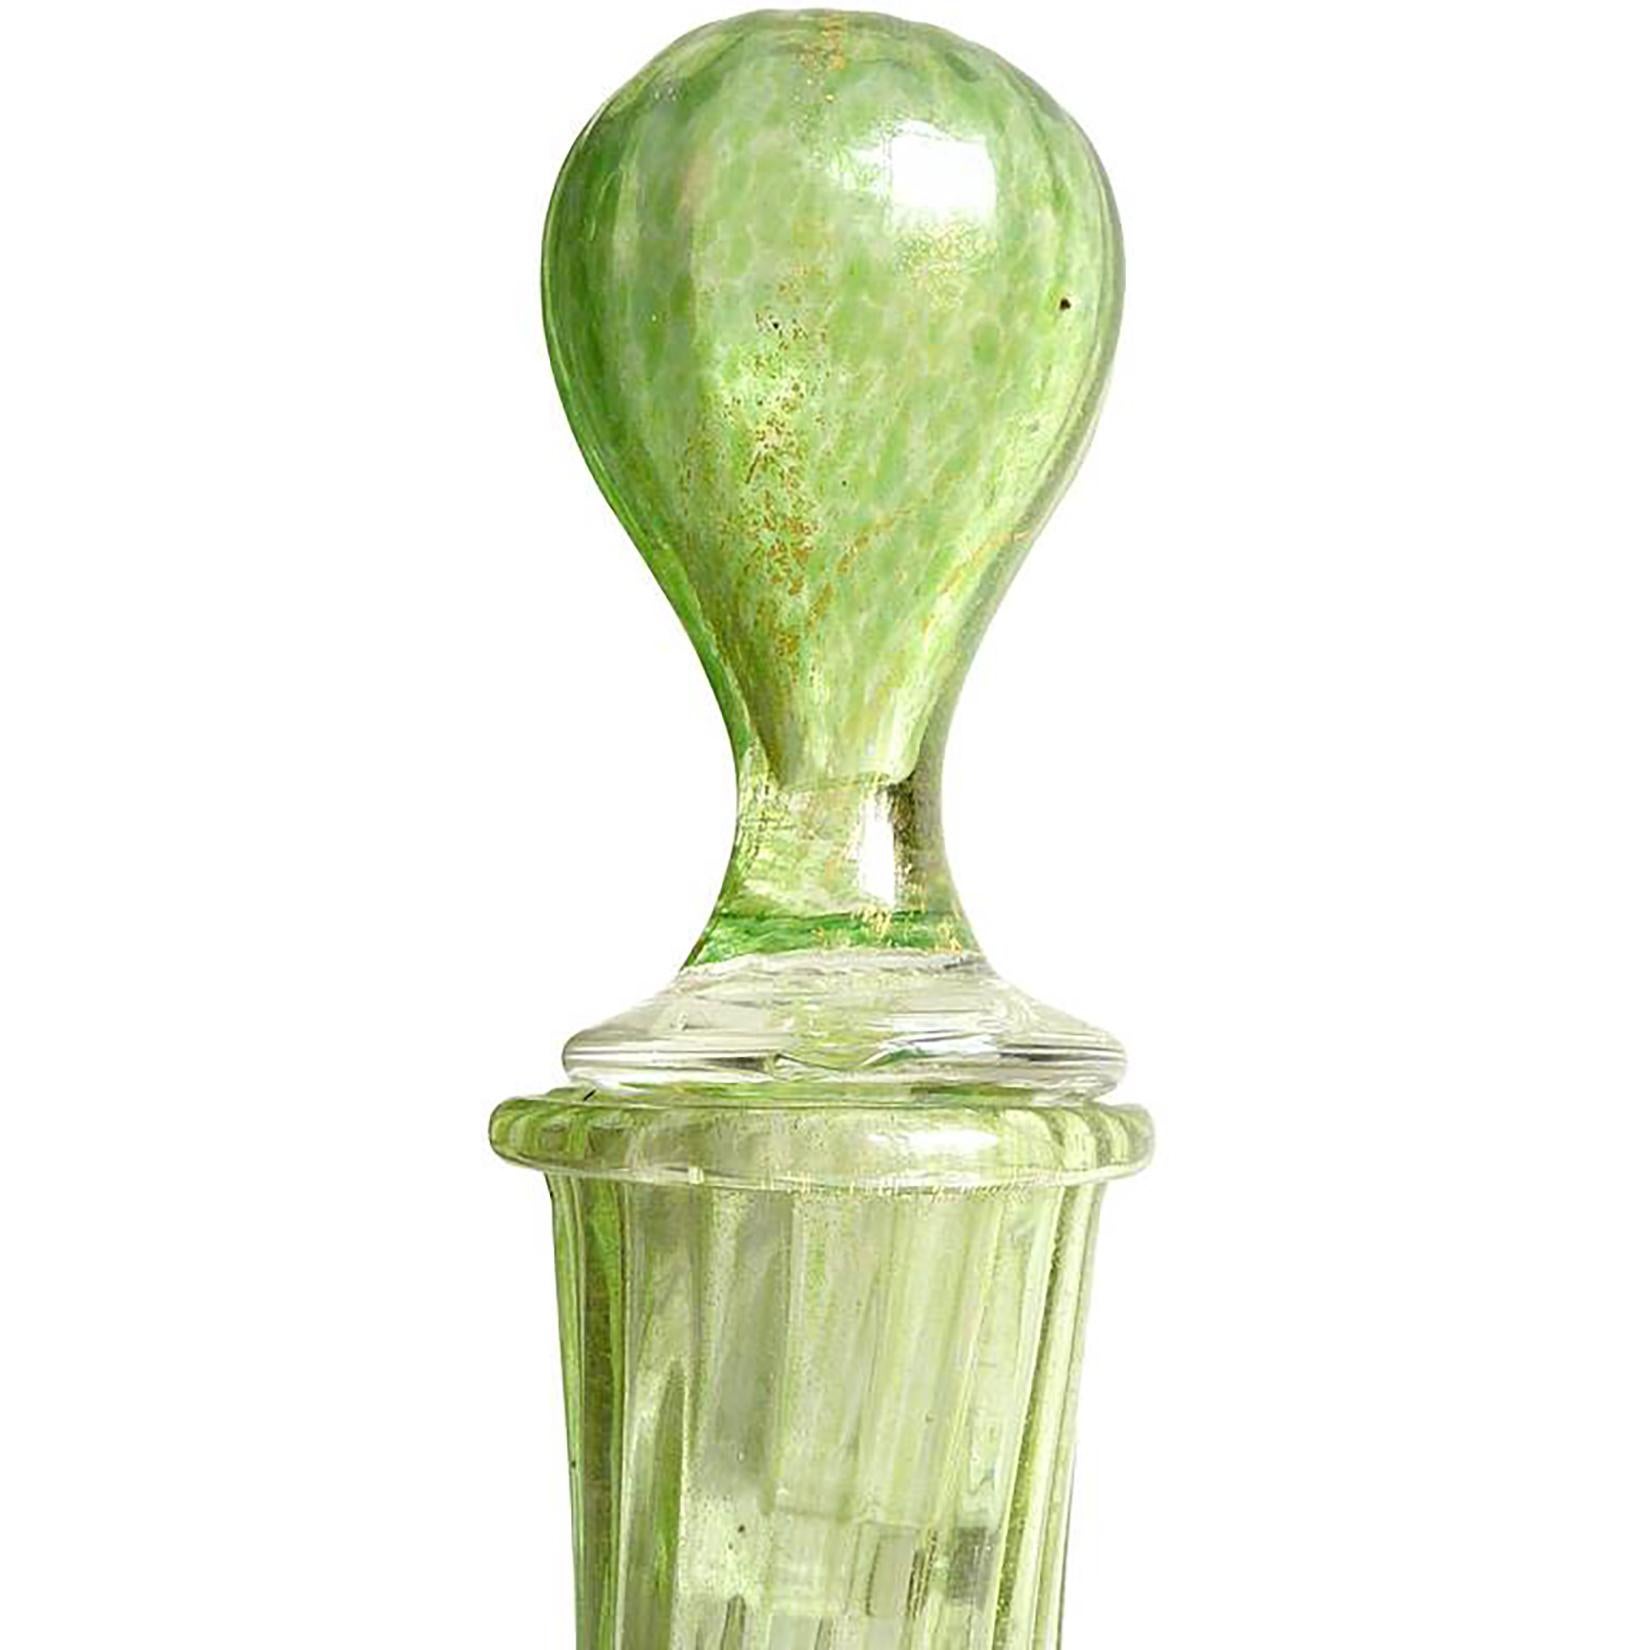 Early antique Venetian hand blown green and gold flecks Italian art glass decanter. Attributed to the Salviati company, circa 1880-1900. The body of the bottle is ribbed, with applied foot, and original stopper. The color is made of tiny little